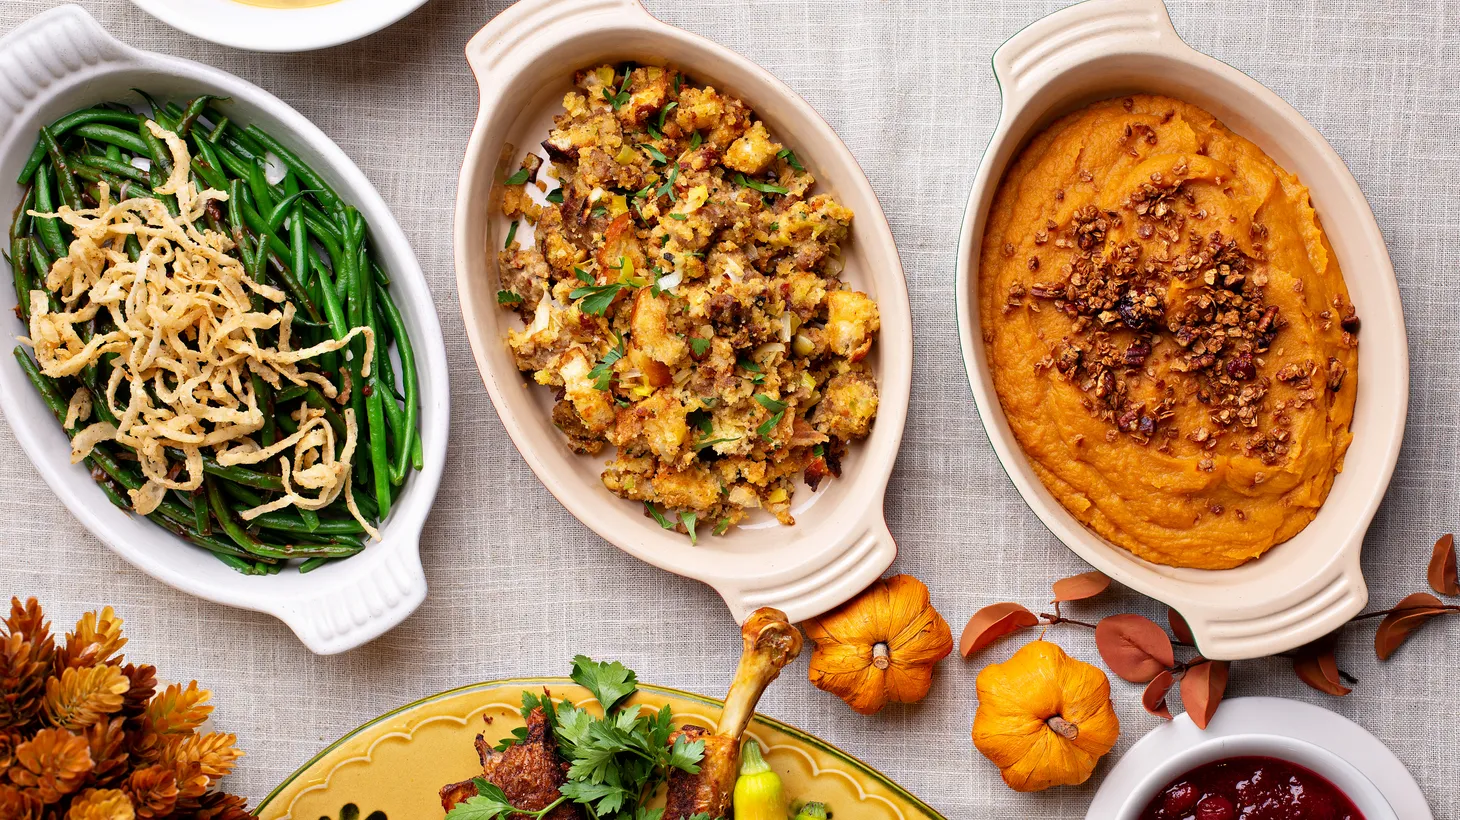 Thanksgiving is one of those holiday meals where the side dishes often steal the show. Want to do that? We can help.